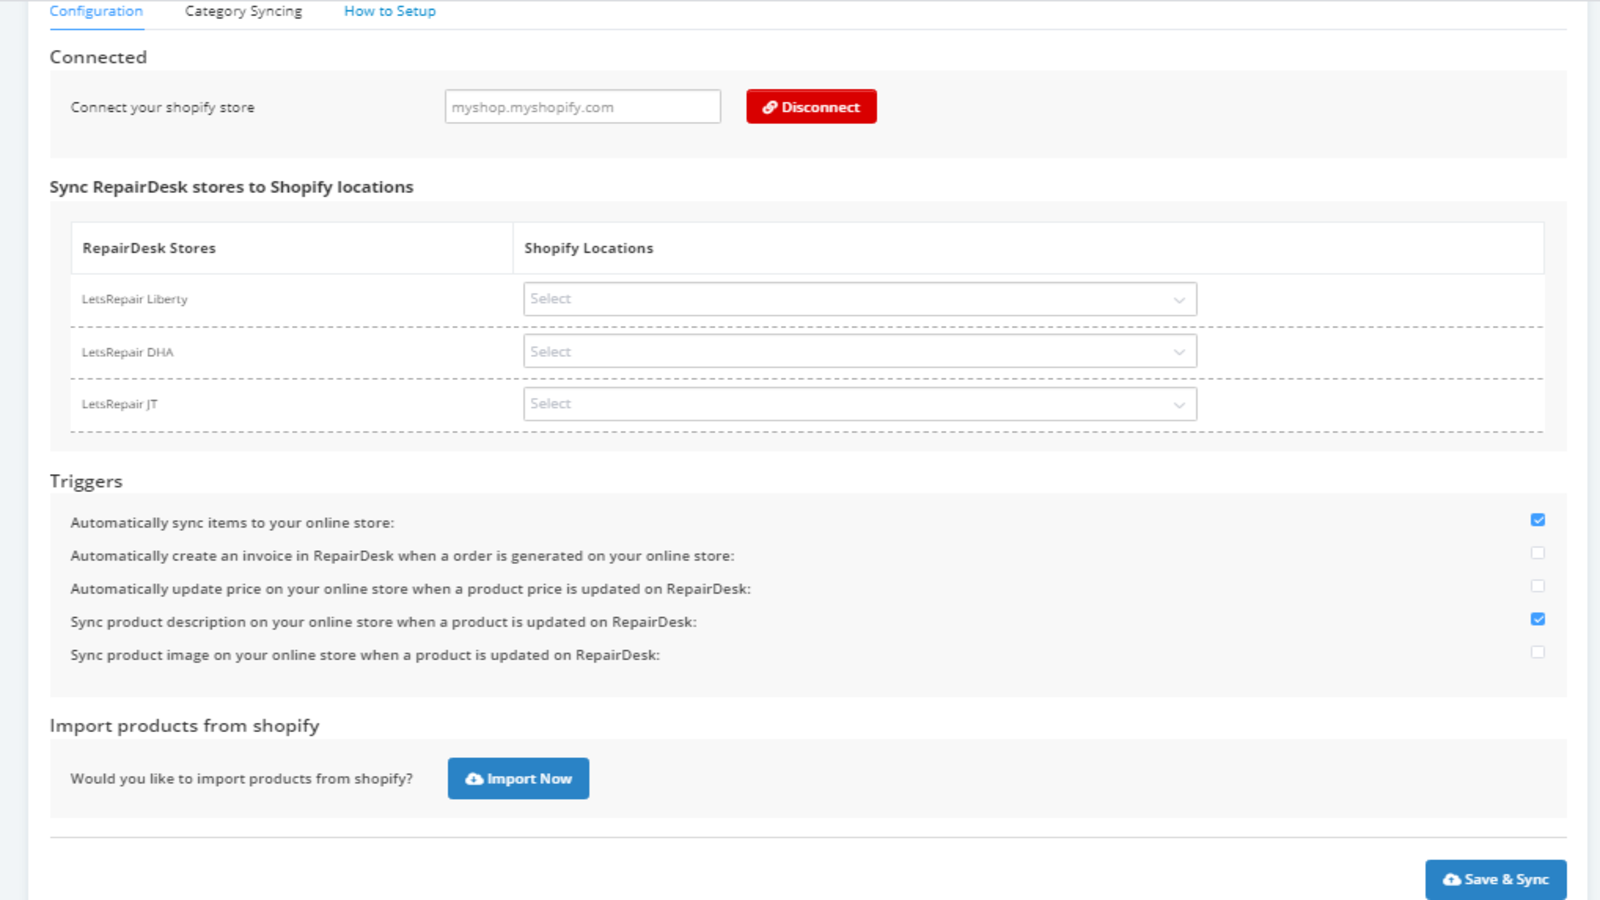 RepairDesk shopify Integration configuration and settings page